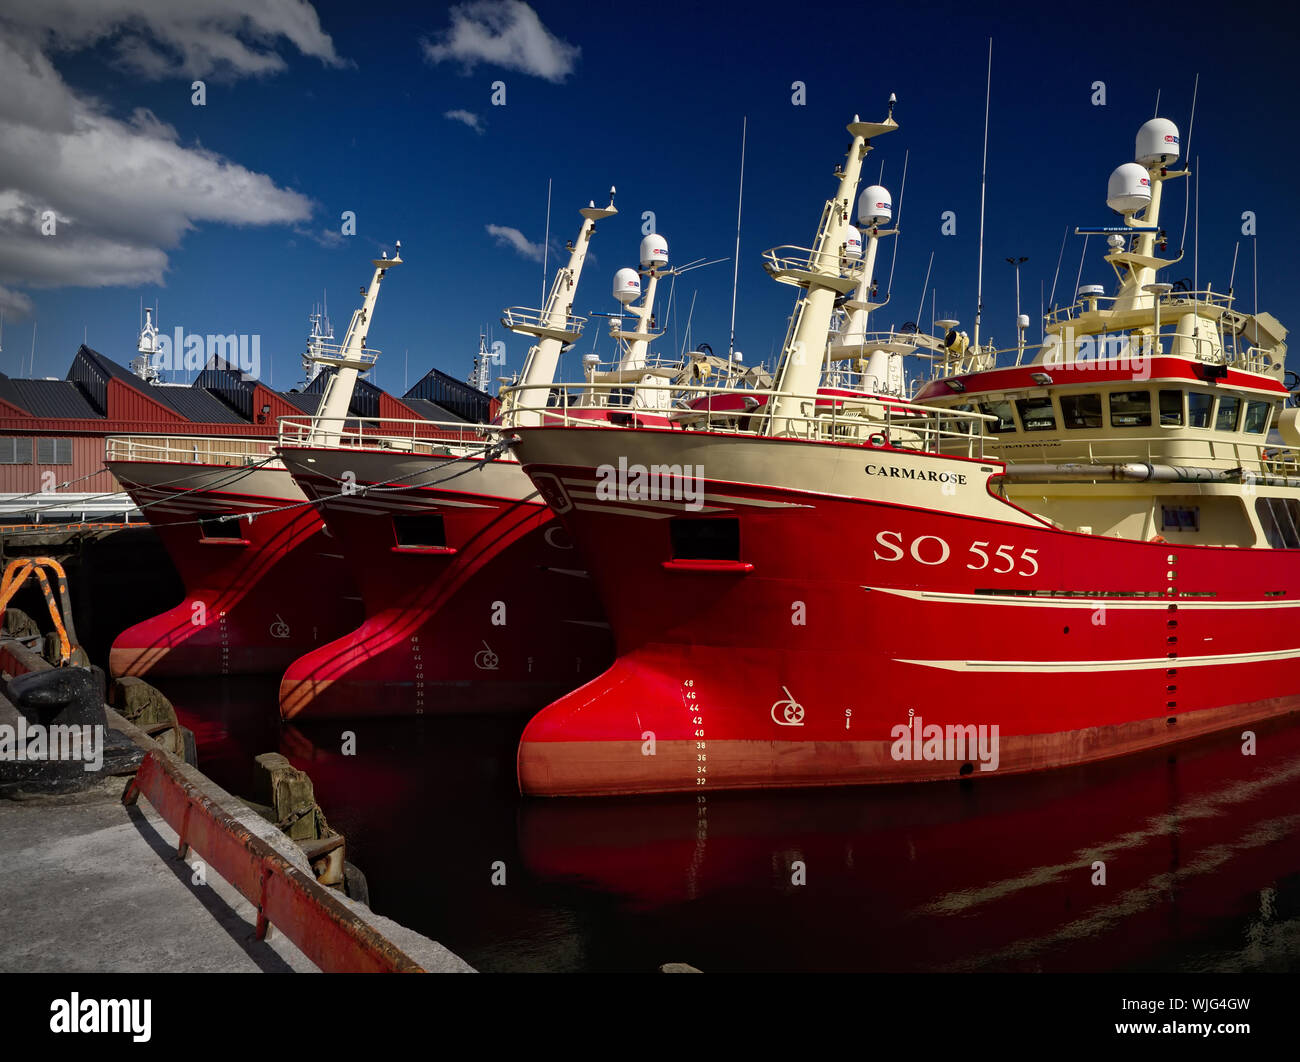 Killybegs, Co. Donegal, Ireland - May 21st, 2019 - Three identical red fishing vessels moored side by side at the pier in Killybegs Harbour Stock Photo